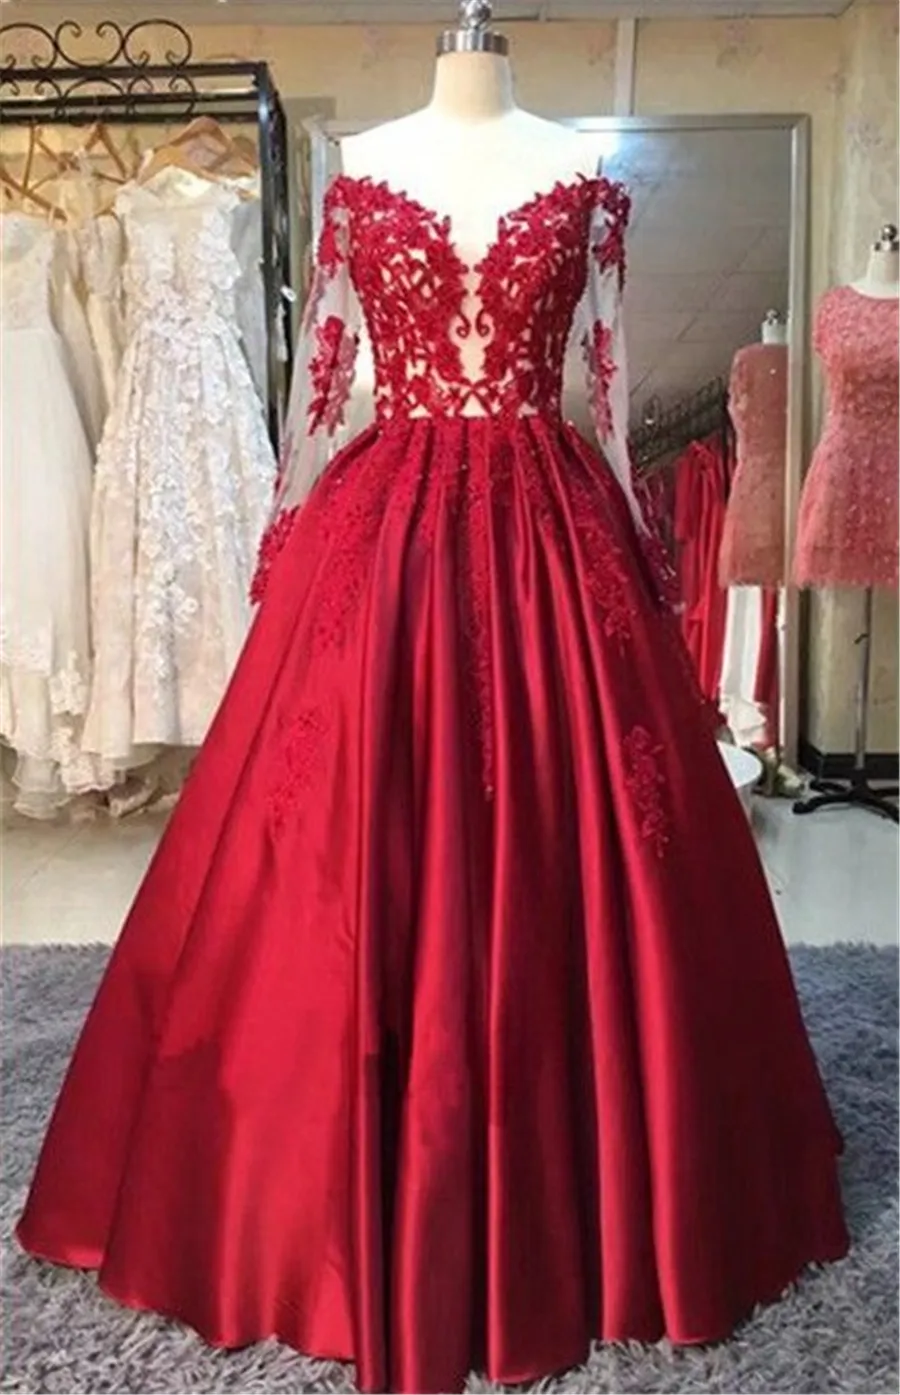 Lace Appliques OfftheShoulder Puffy Red Long Sleeves Prom Dresses See Through Matte Satin Evening Dress vestidos largos de fiest9132513